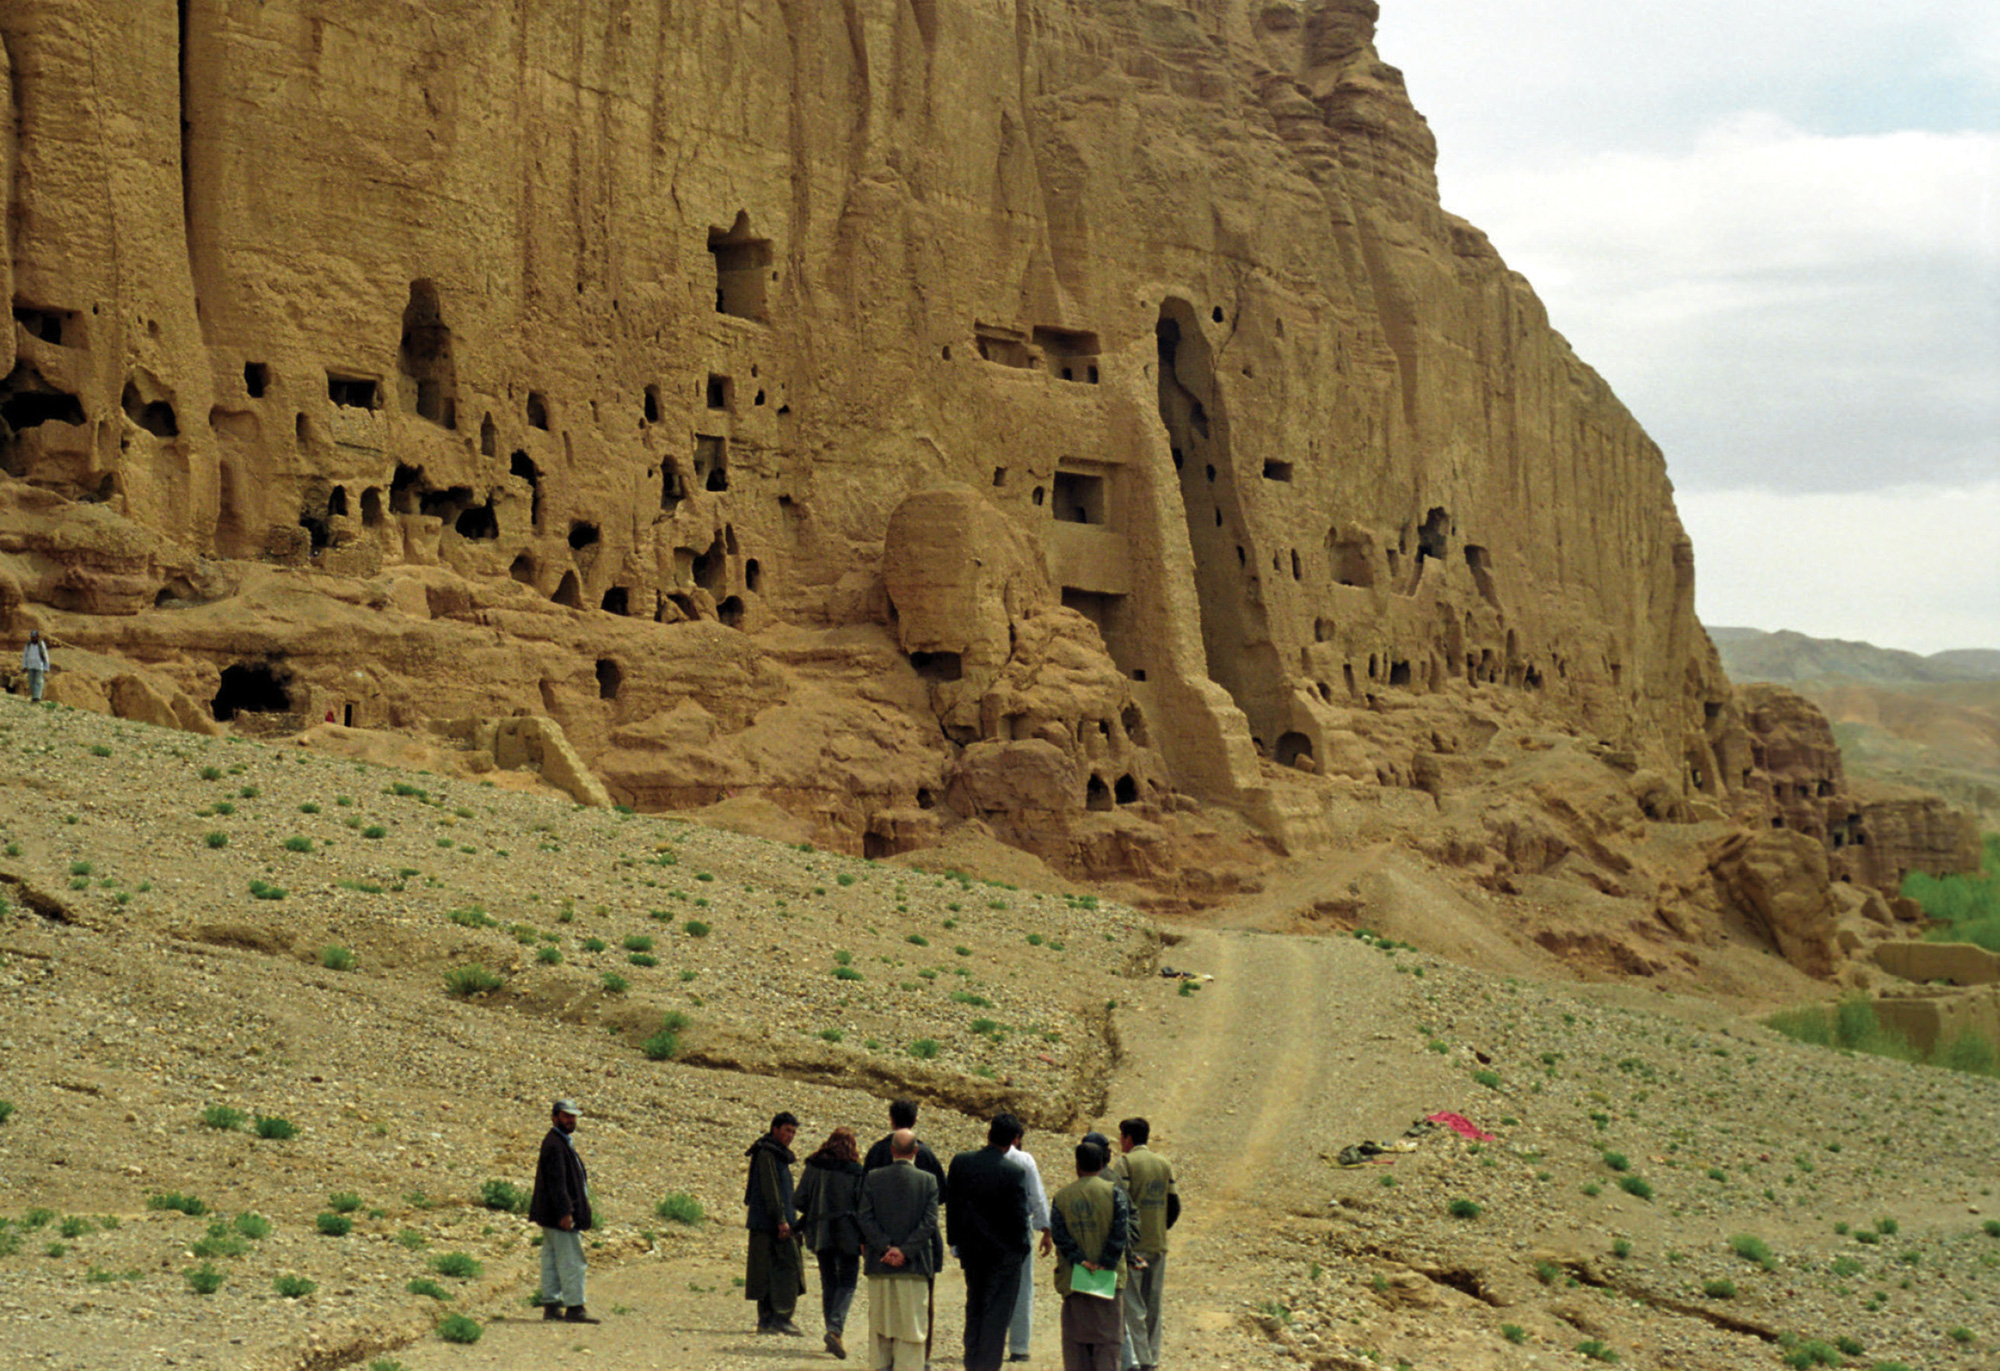 A photograph of people standing in Bamiyan Valley below cliffs dotted with niches where the Buddha statues once stood.